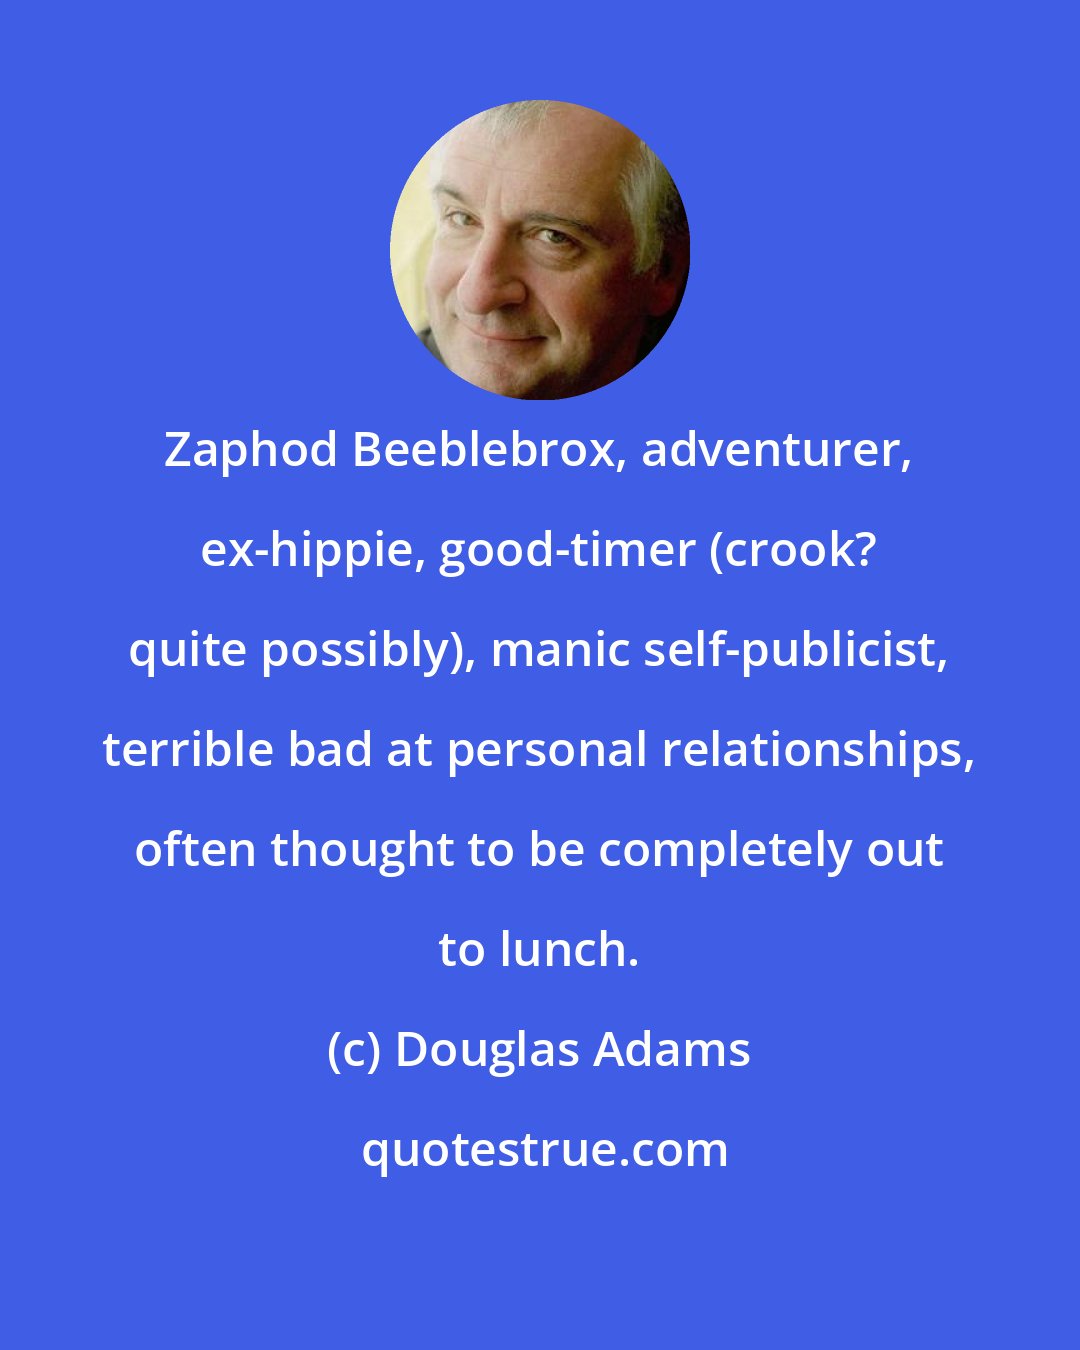 Douglas Adams: Zaphod Beeblebrox, adventurer, ex-hippie, good-timer (crook? quite possibly), manic self-publicist, terrible bad at personal relationships, often thought to be completely out to lunch.